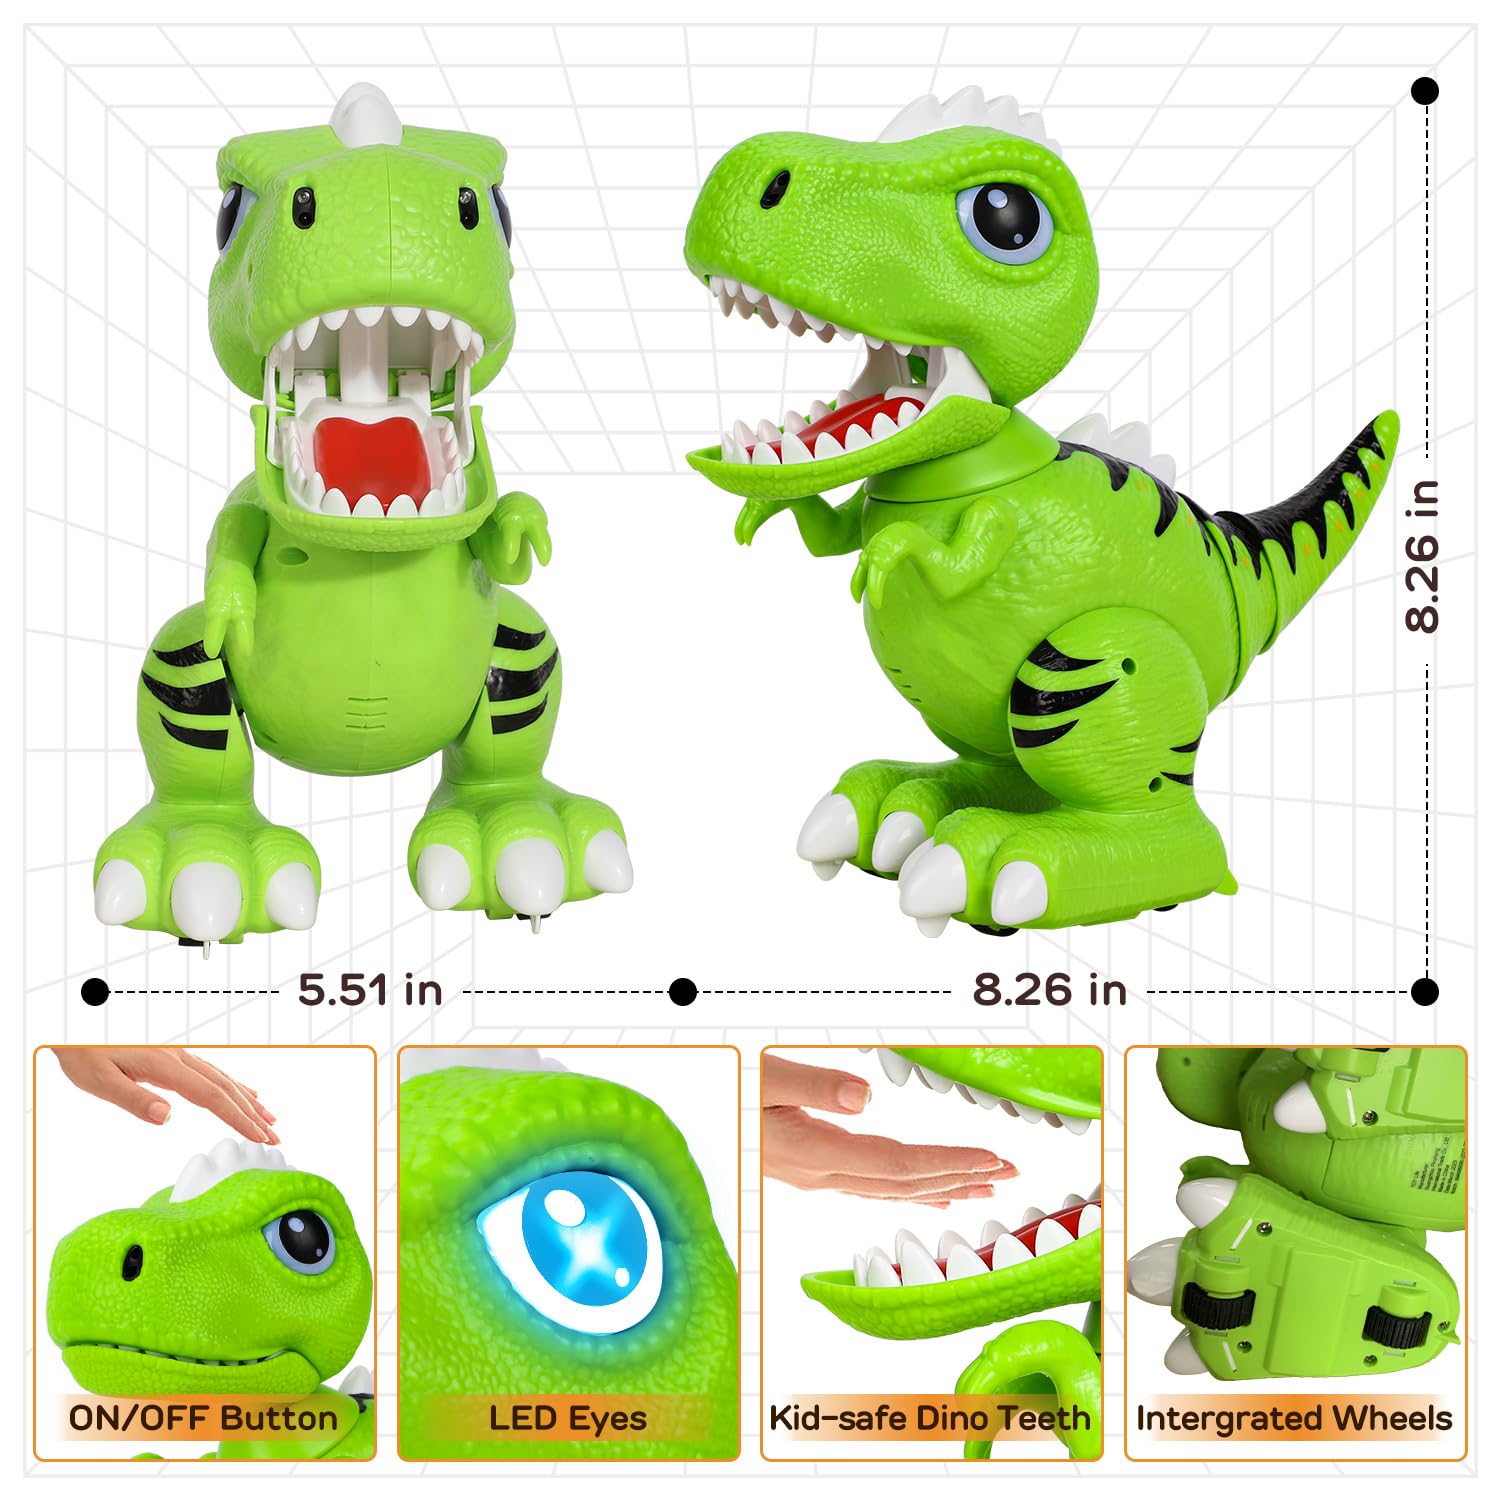 STEAM Life RC Robot Dinosaur Toys for Kids, Remote Control Smart Robot Pet Dinosaur for Age 3 4 5 6 7 8 Boys Girls, Interactive Hand Motion Gesture Walking Dancing Robot, STEM Kids Gifts Toys for Boy